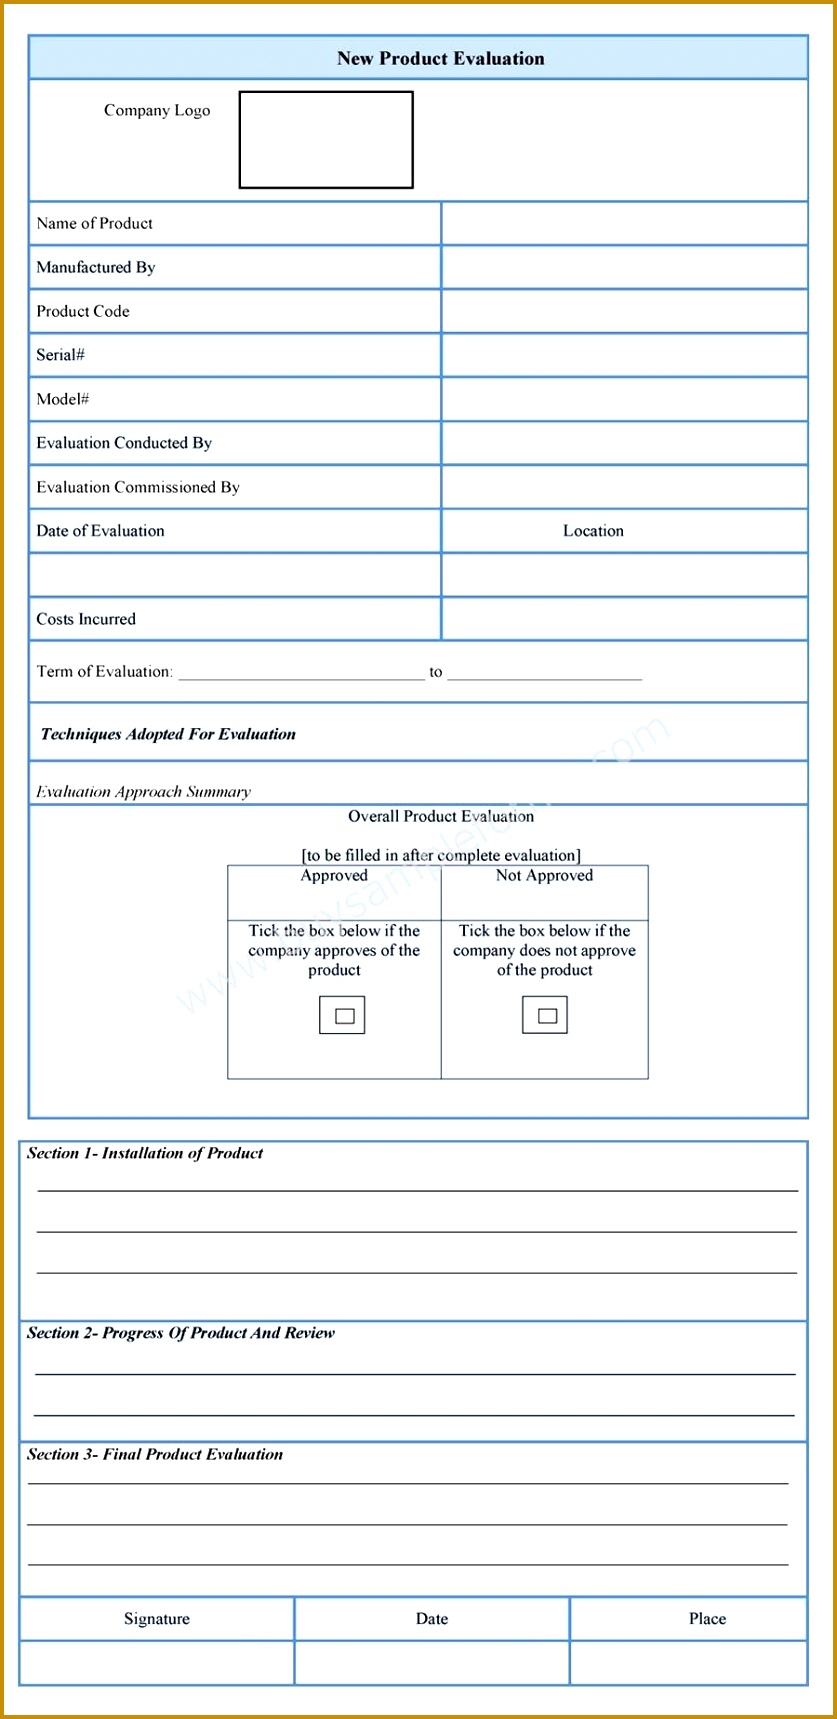 100 [ Post Event Evaluation Template ] 9 Tips For Better New Product Evaluation Form Sample 1719837